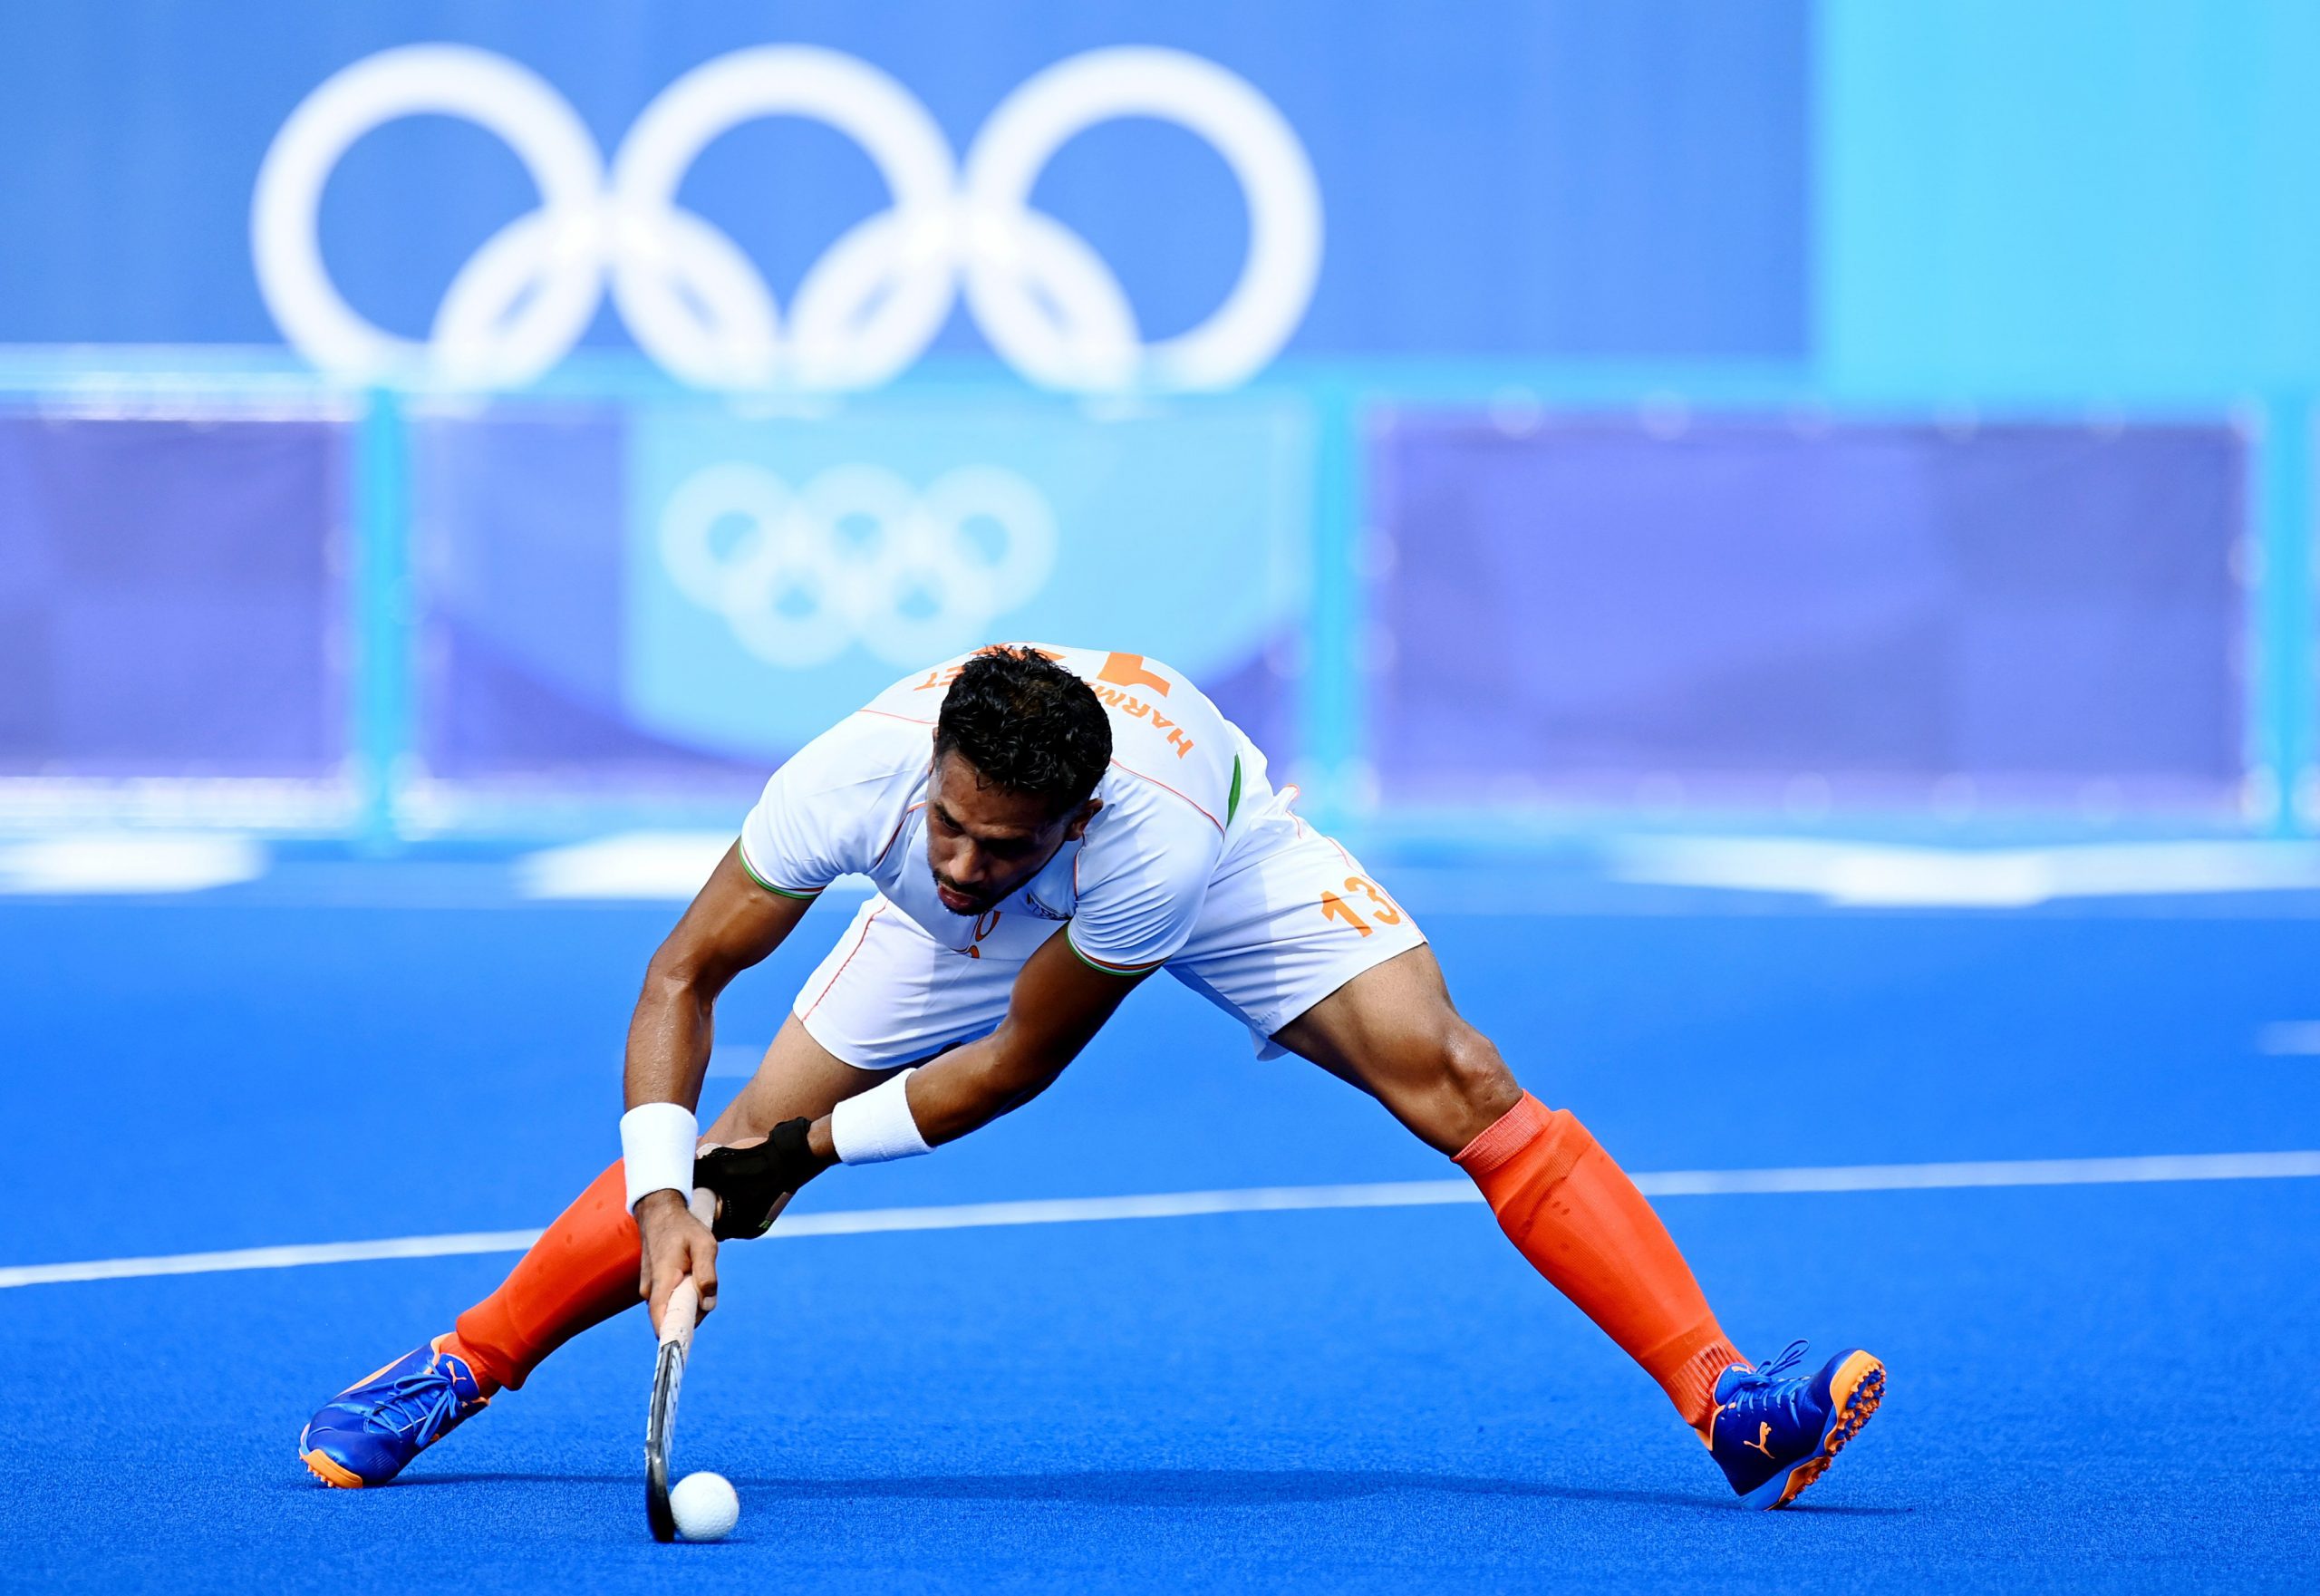 Tokyo Games: India men’s hockey team reach Olympics semi-finals after 41 years, beat Great Britain 3-1